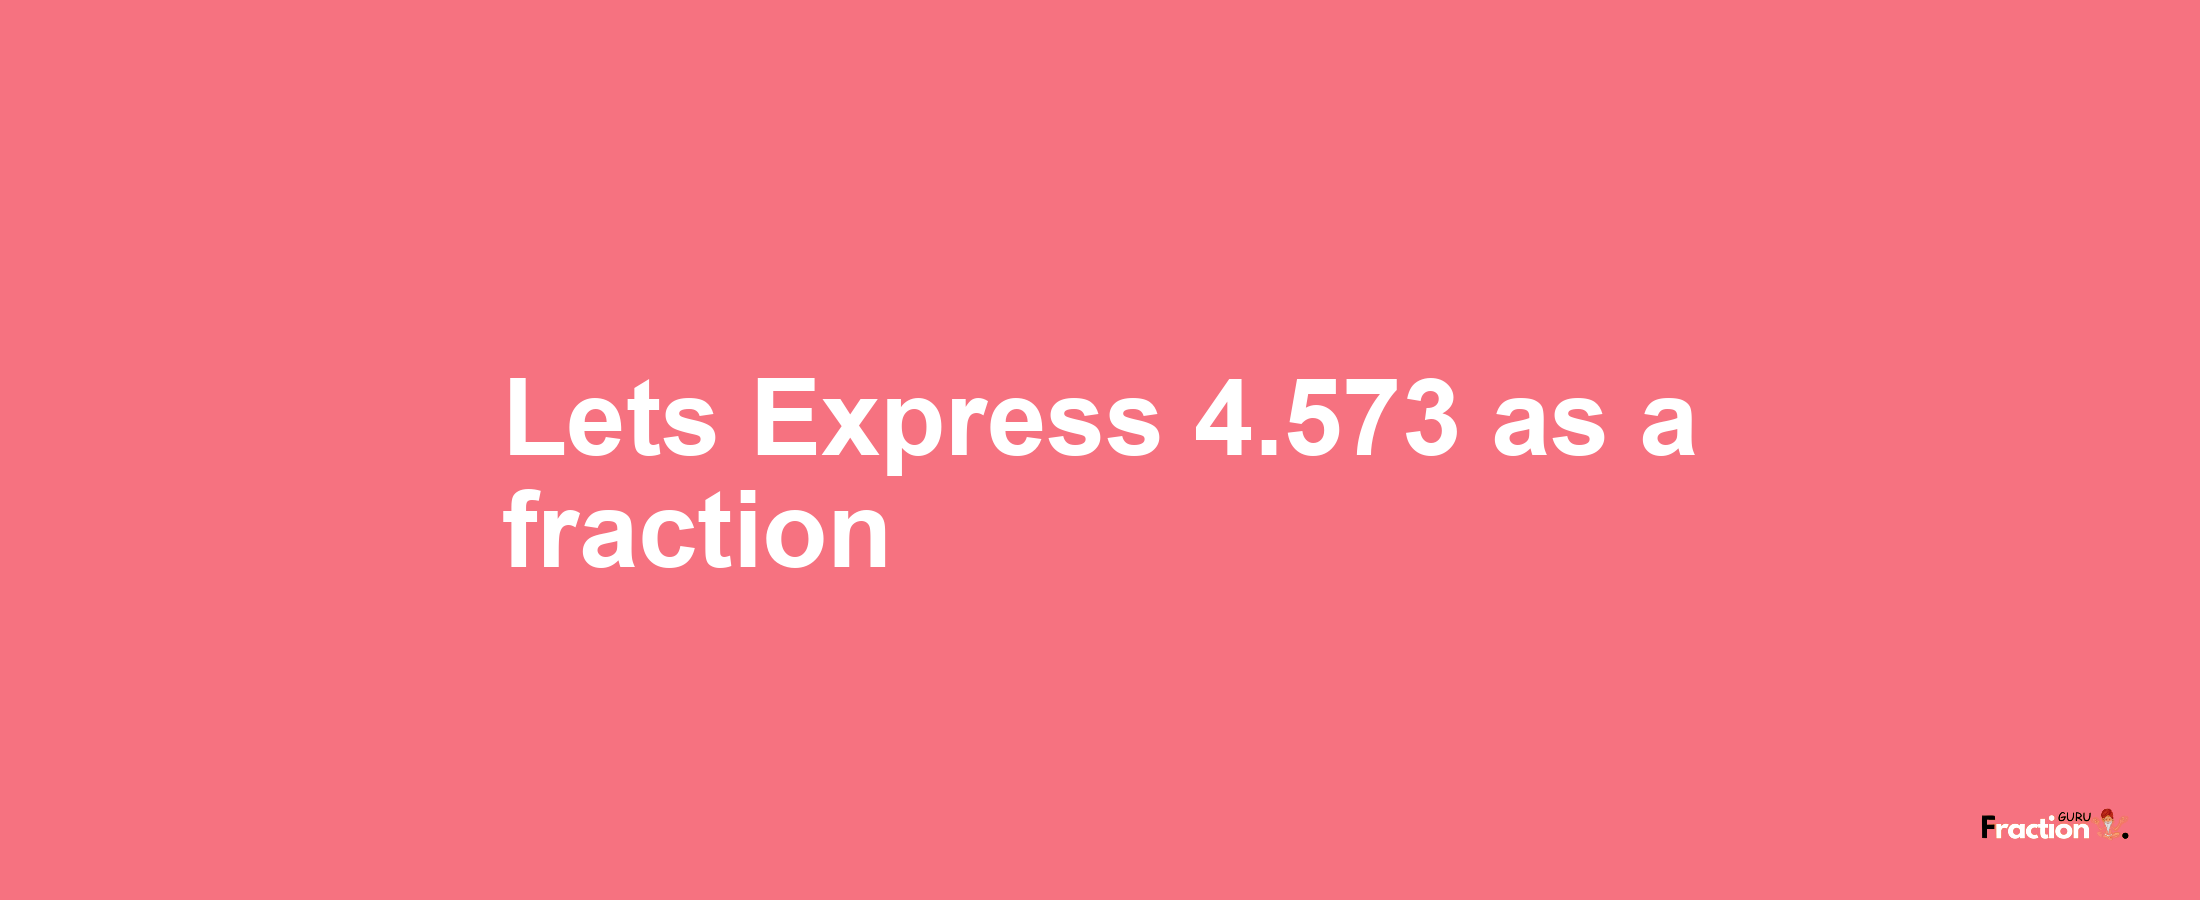 Lets Express 4.573 as afraction